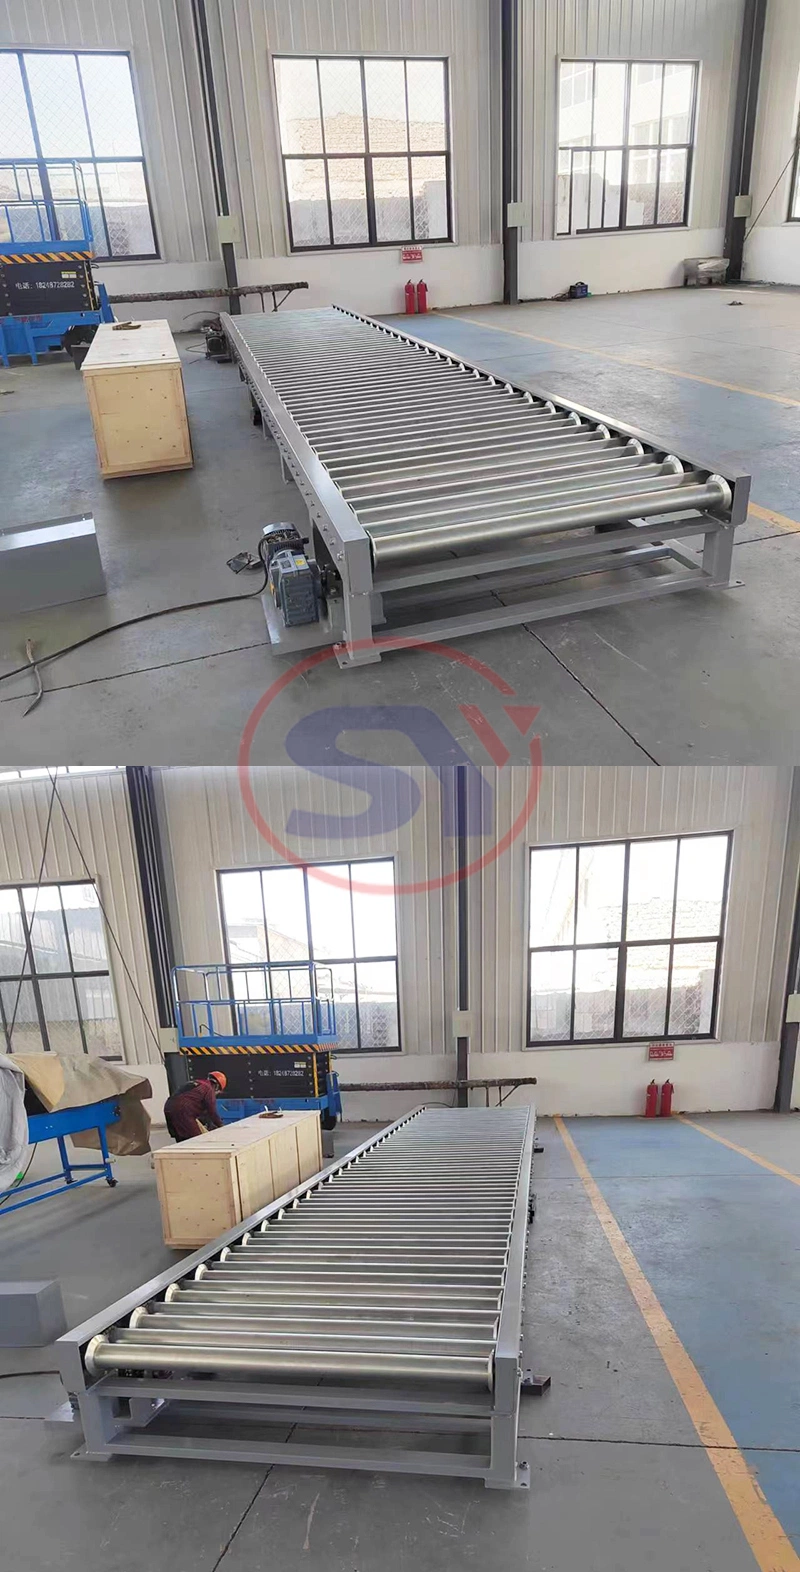 Automatic Food Grade Stainless Steel Fruit Conveying Sorting Packing Roller Conveyor